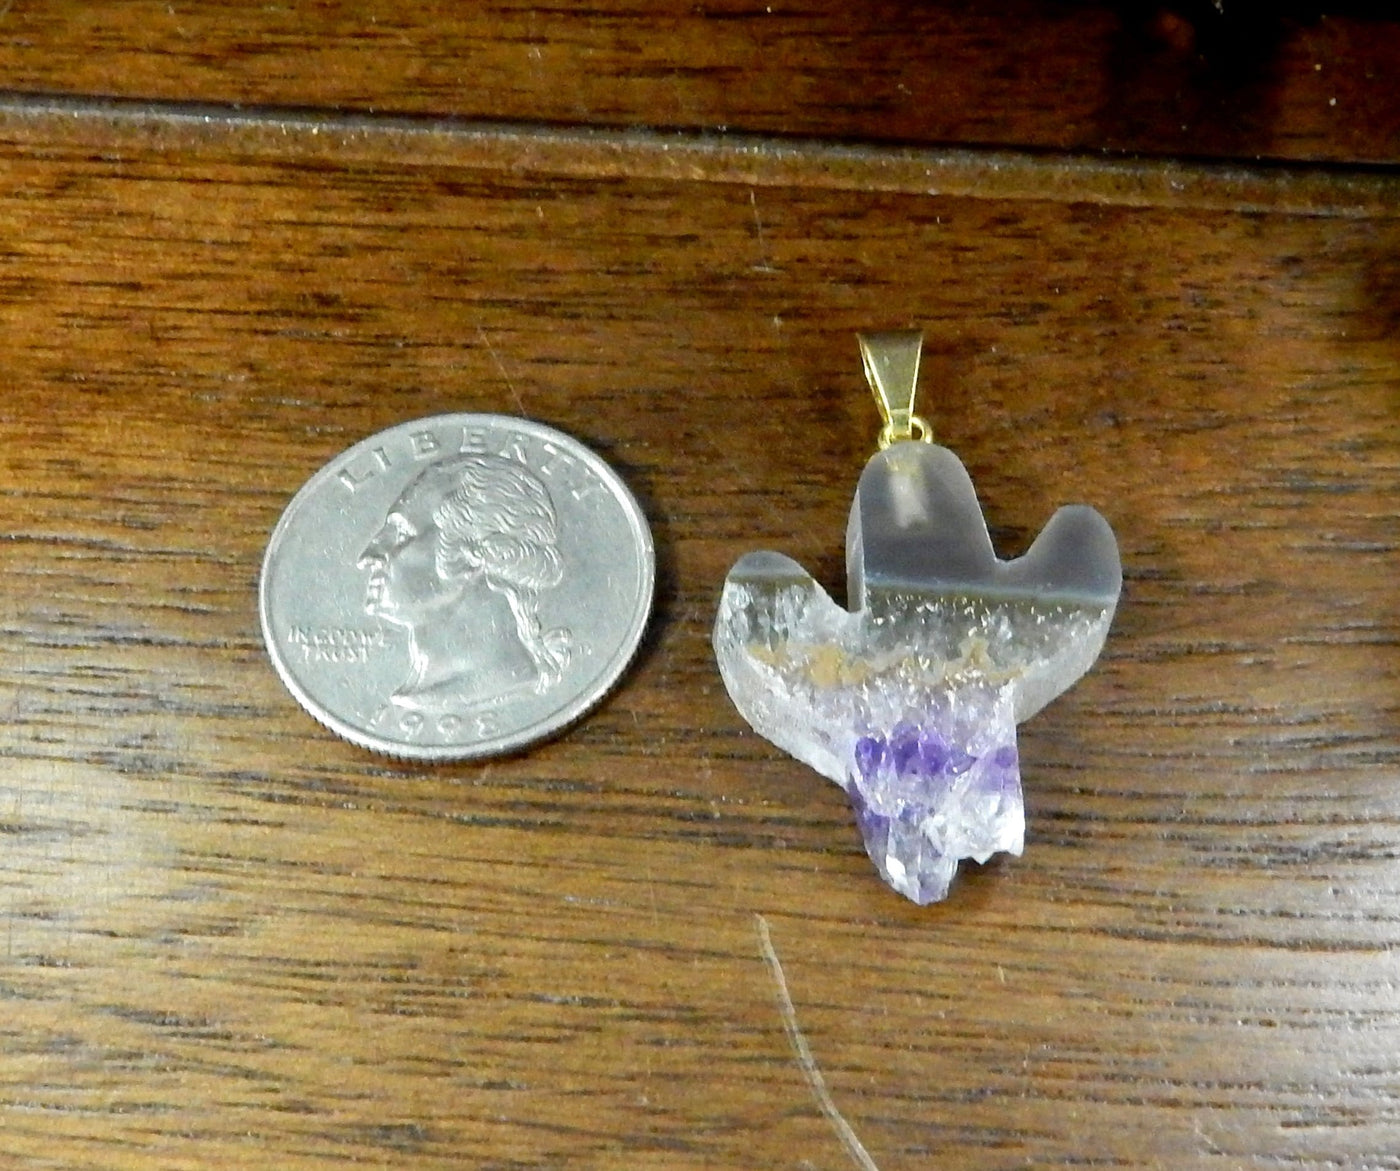 amethyst slice cactus pendant next to a quarter on wooden background